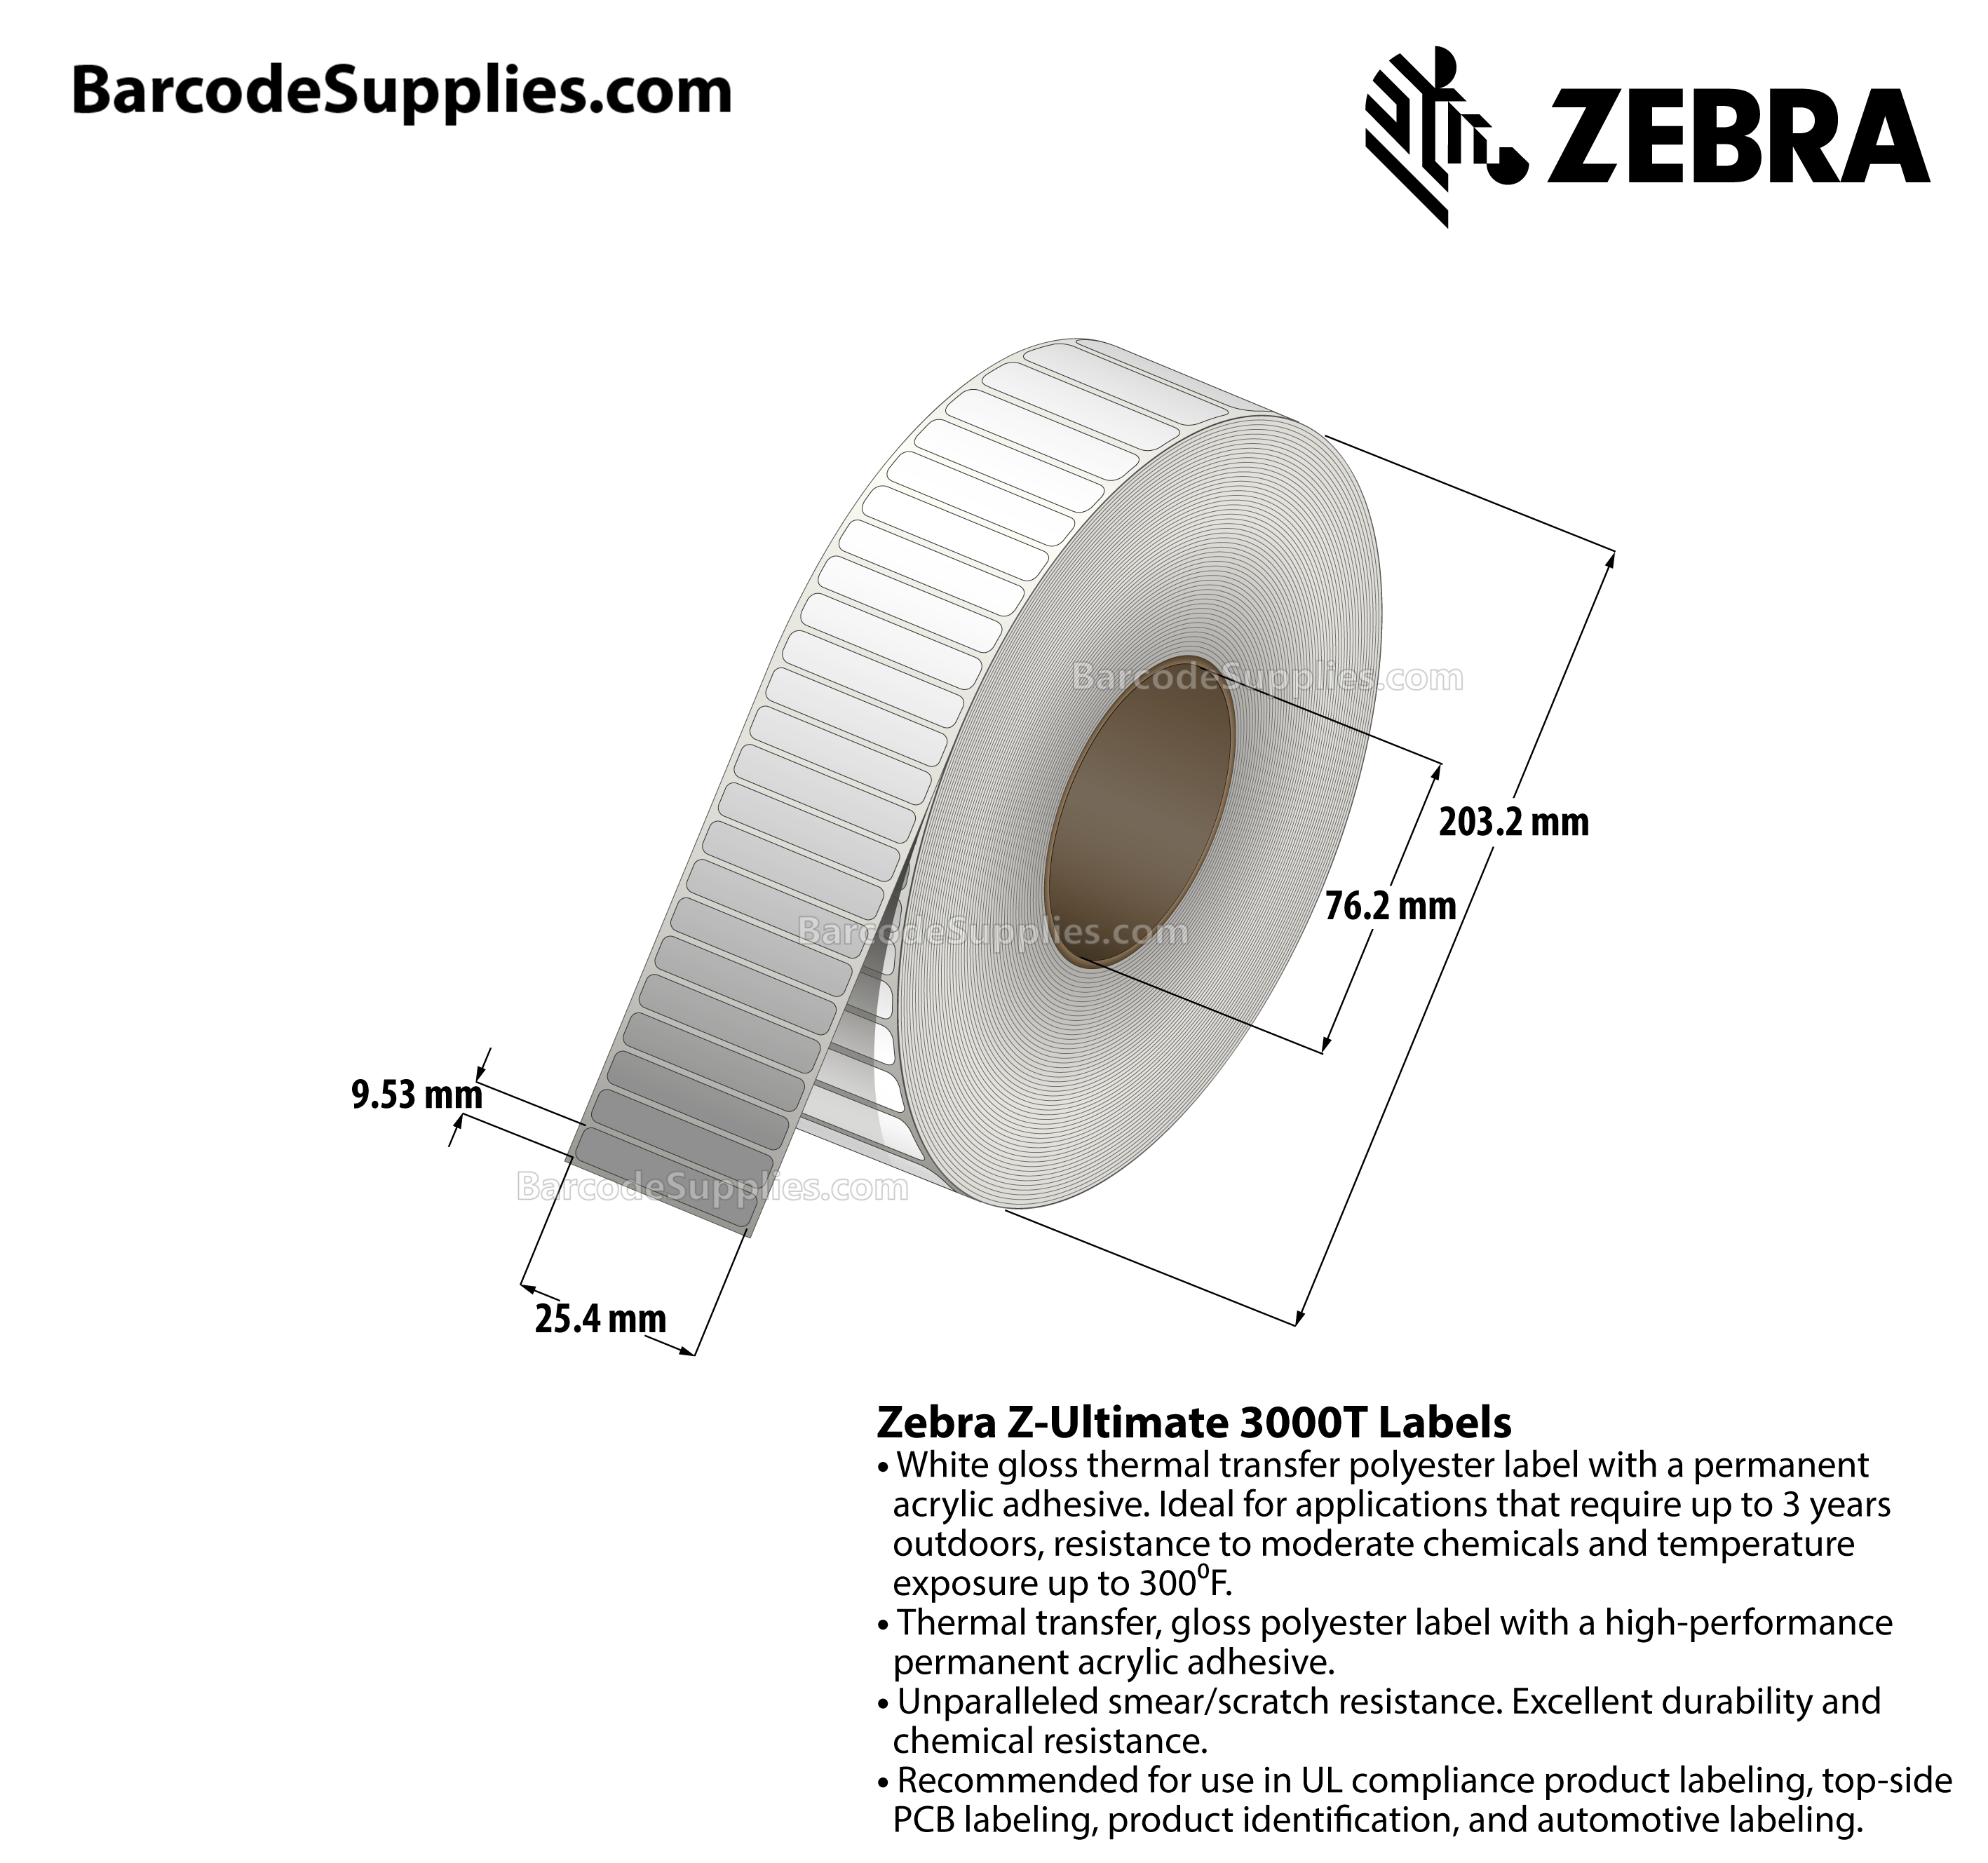 2 x 0.375 Thermal Transfer White Z-Ultimate 3000T Labels With Permanent Adhesive - Not Perforated - 10000 Labels Per Roll - Carton Of 4 Rolls - 40000 Labels Total - MPN: 10011695